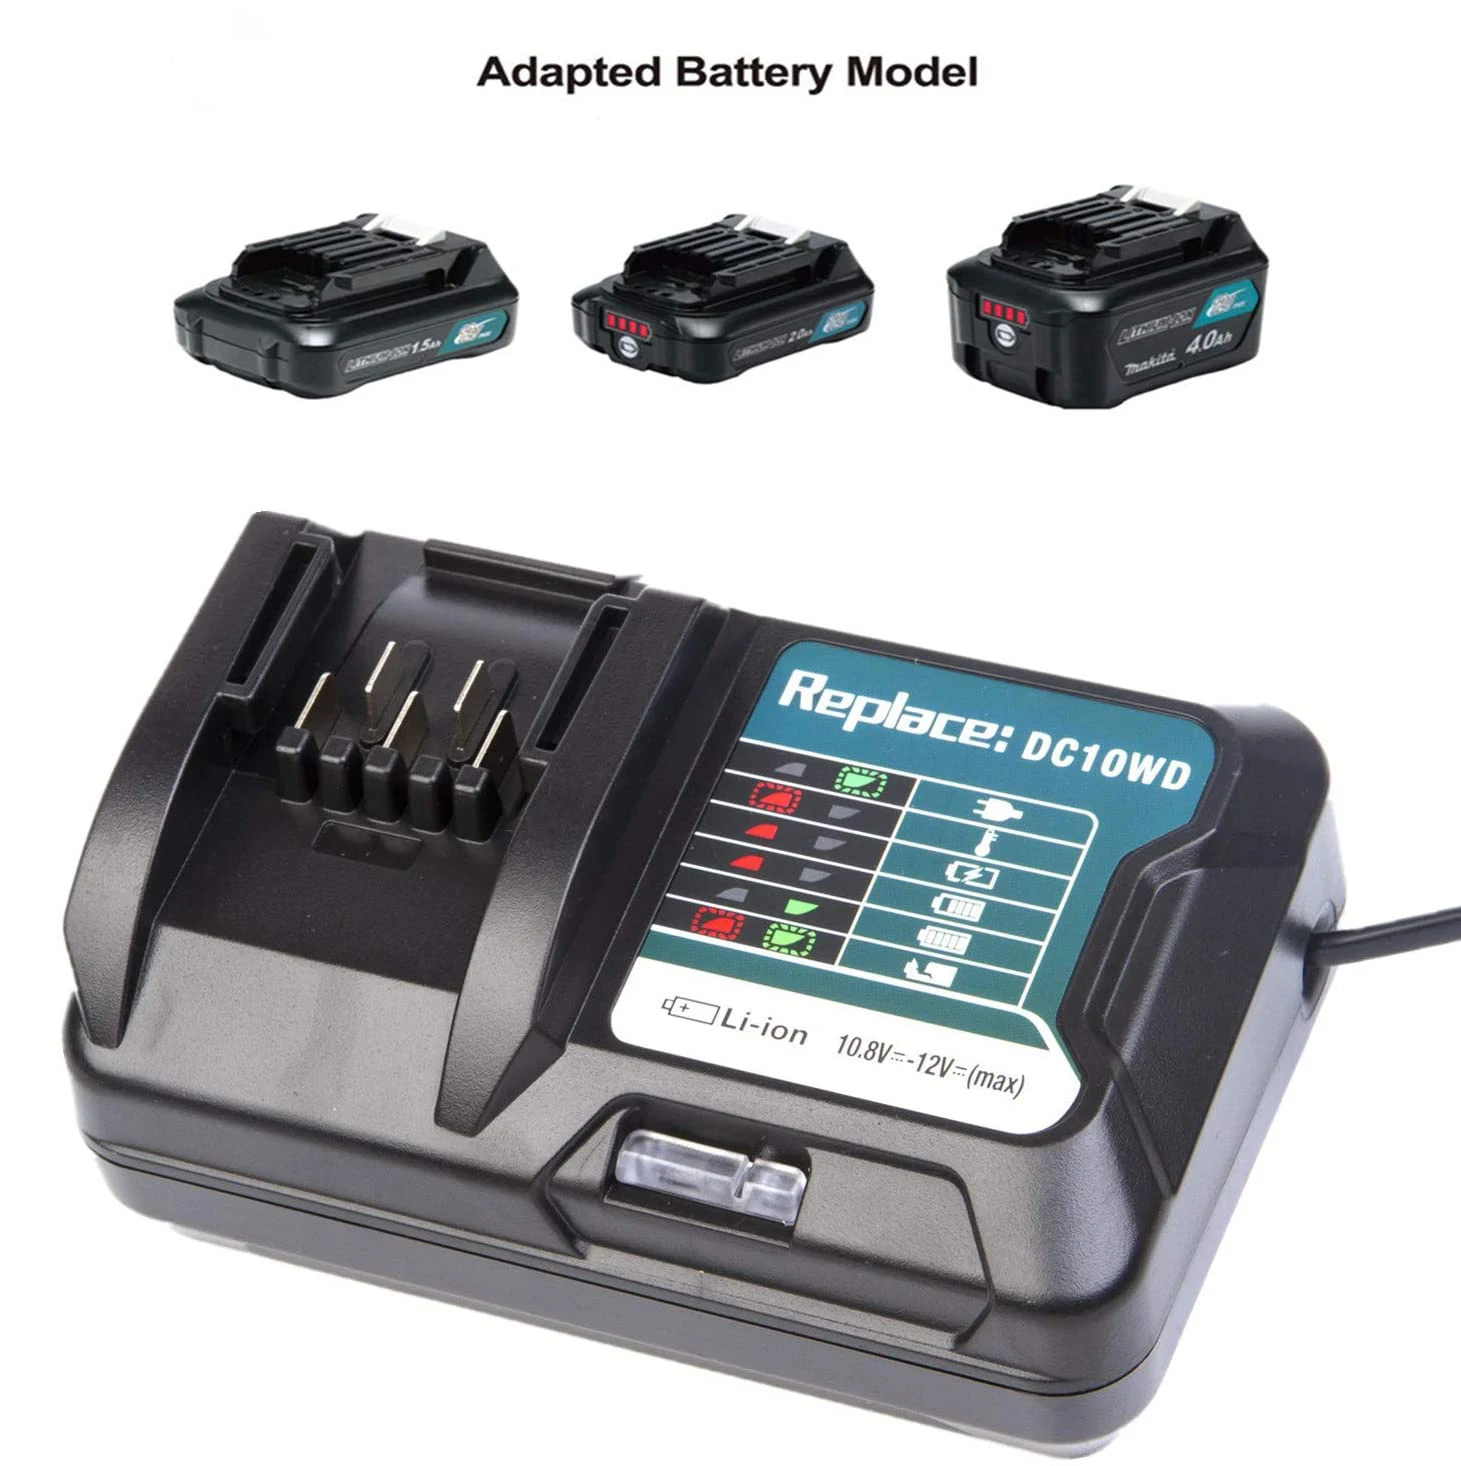 

DC10WD BL1015 Replace Battery Charger for MAKITA 10.8V 12V BL1016 BL1021B BL1041B FD05 DT03 RJ03Z SH02Z PH04Z DC10SB Charger